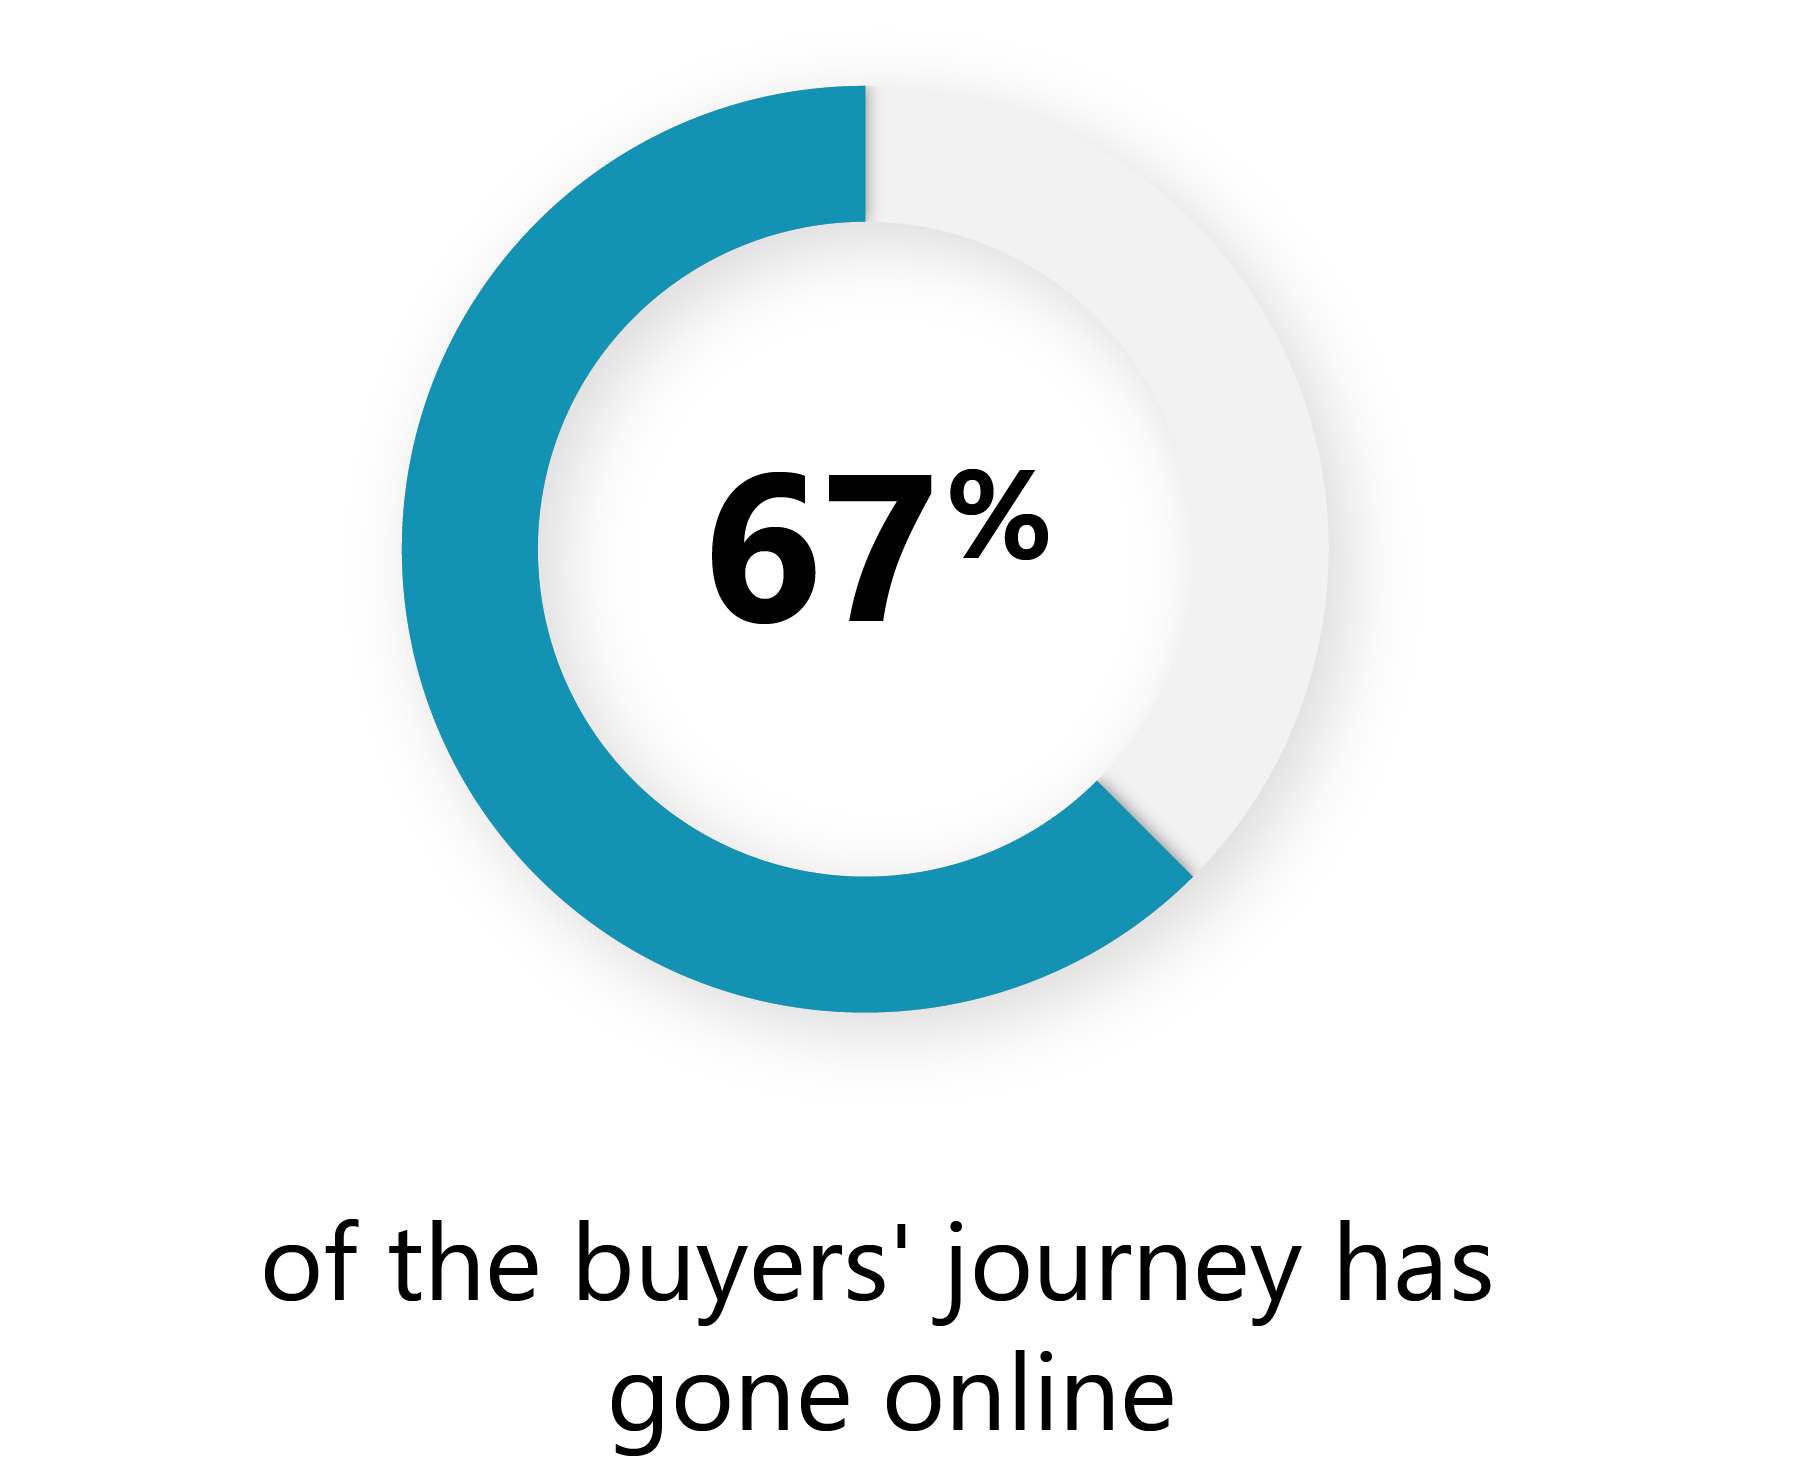 67% of the buyers' journey has gone online